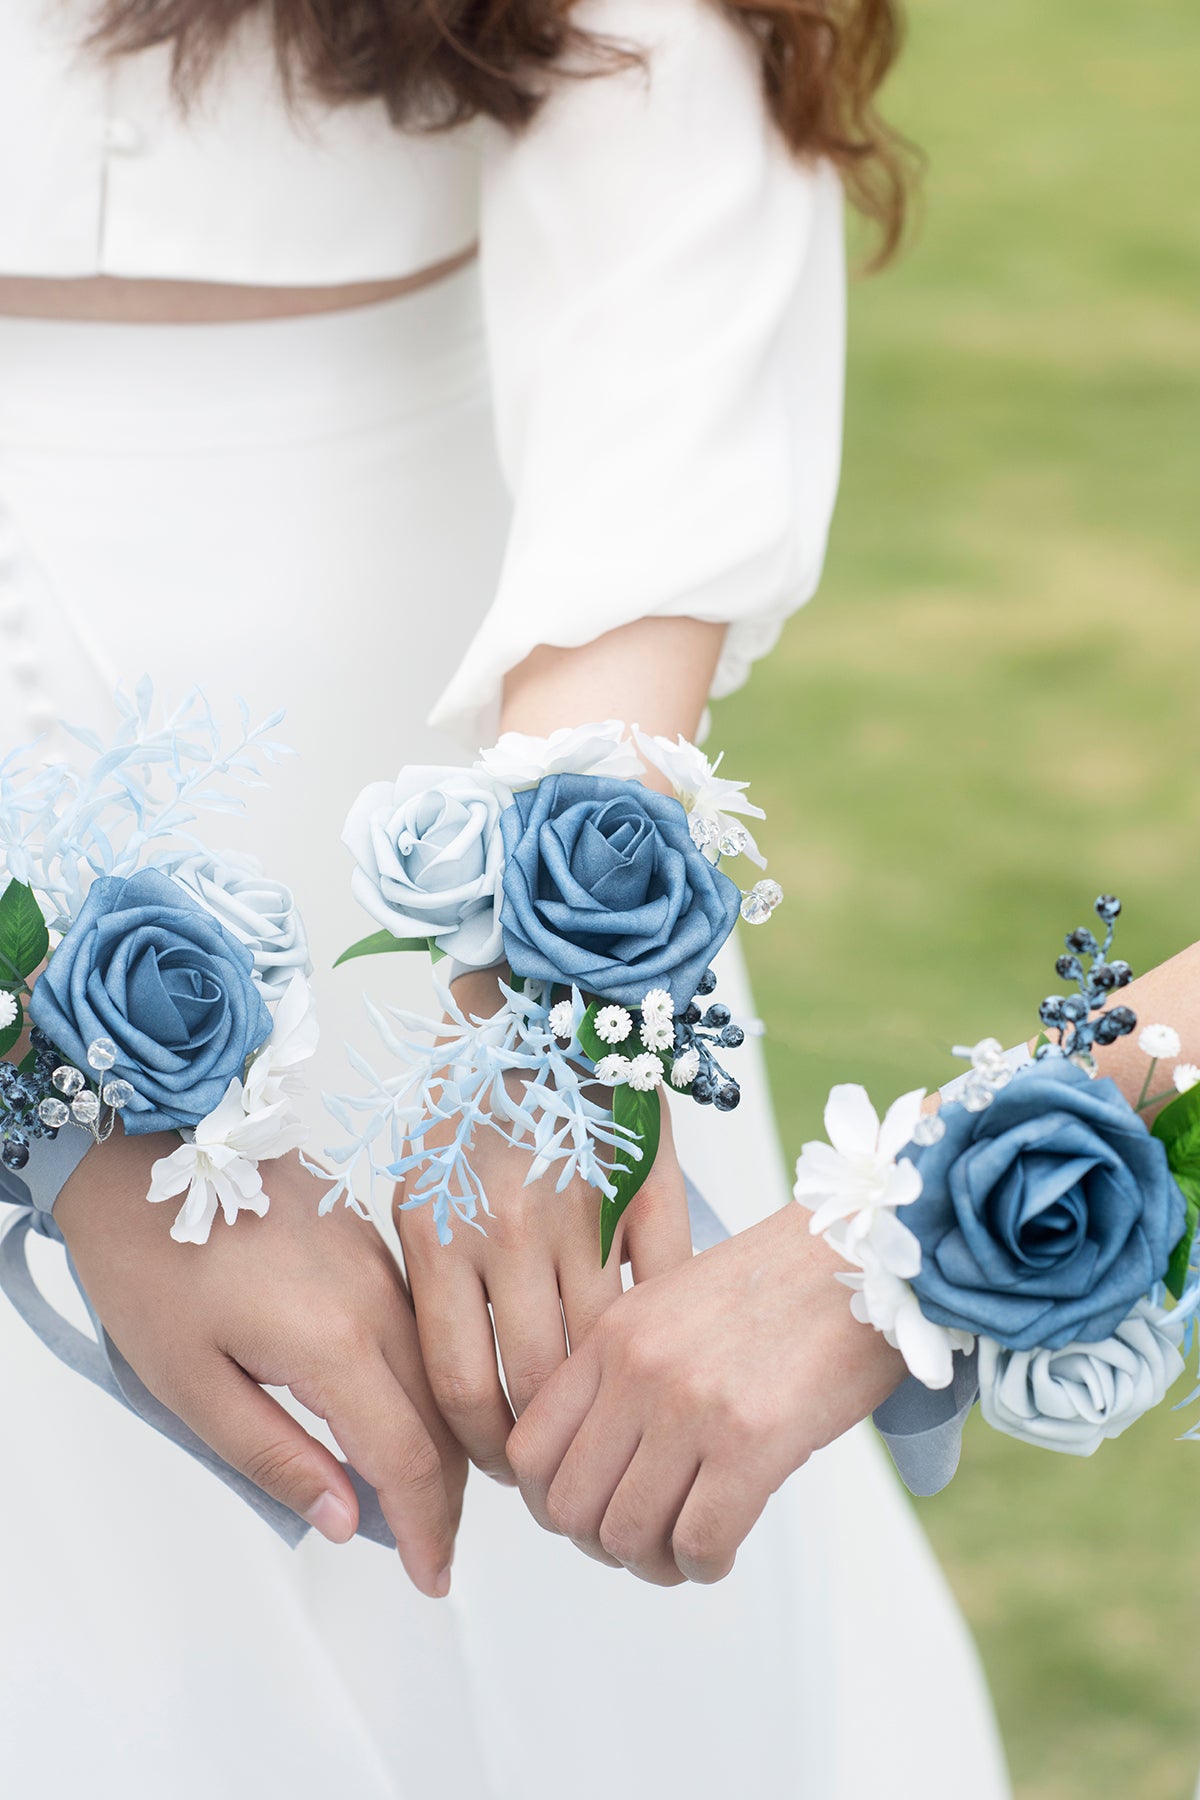 Wedding Wrist Corsages (Set of 6) - Romantic Dusty Blue – Ling's Moment